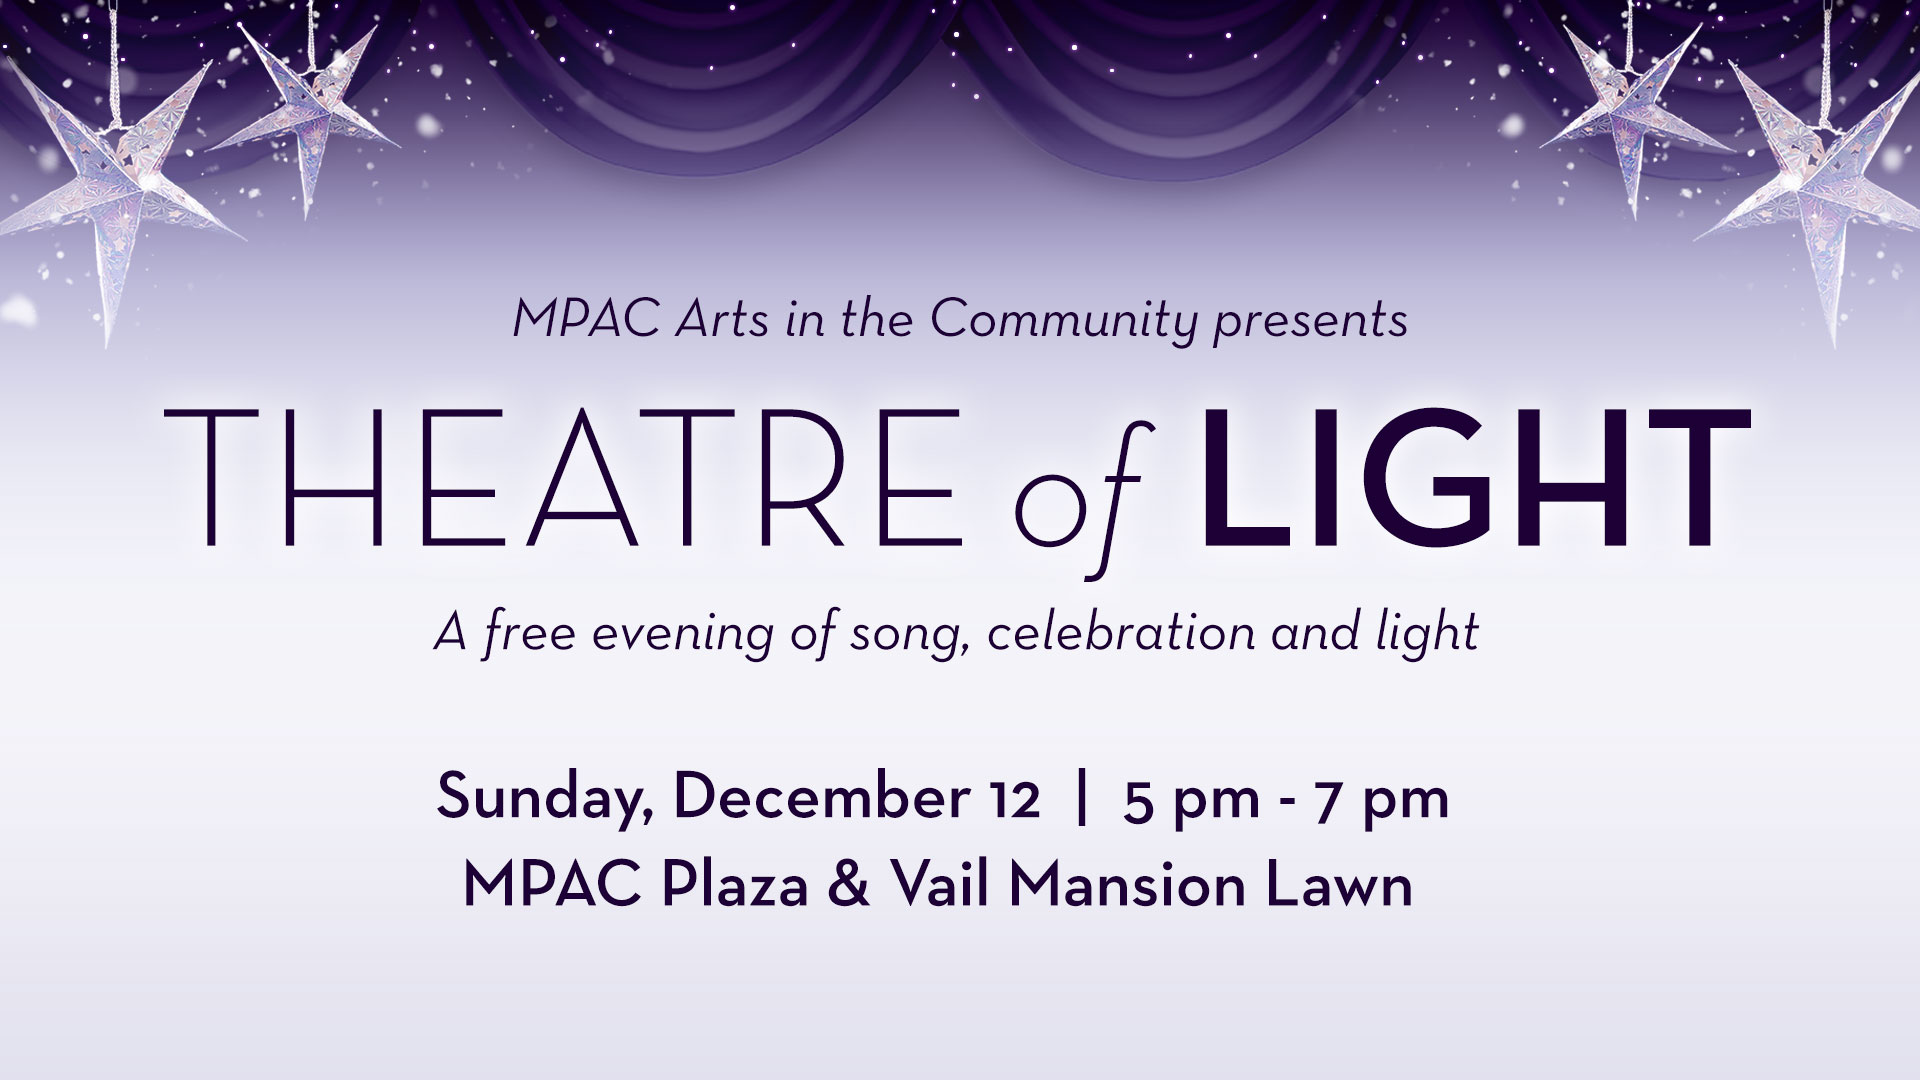 Image of MPAC's Theatre of Light Event